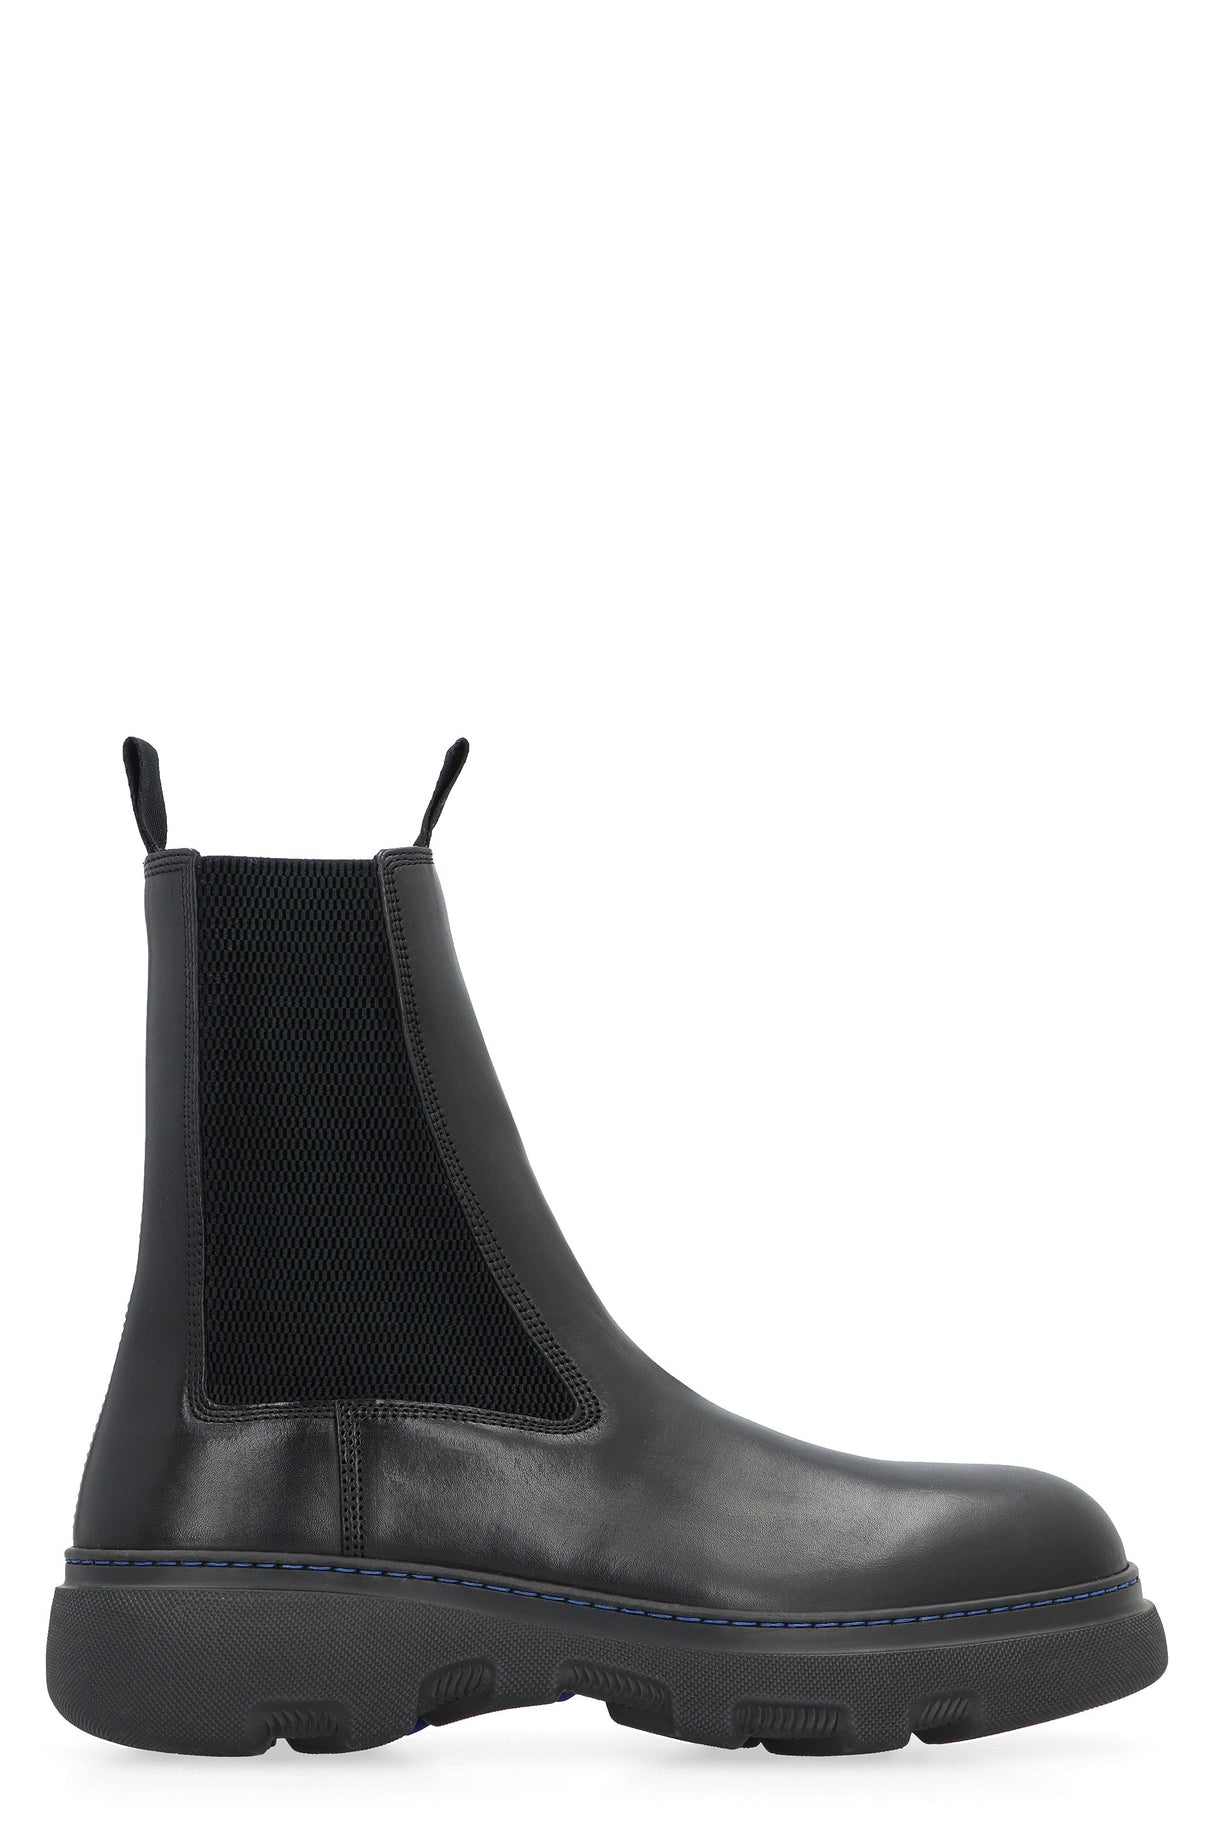 BURBERRY Classic Black Leather Chelsea Boots for Men